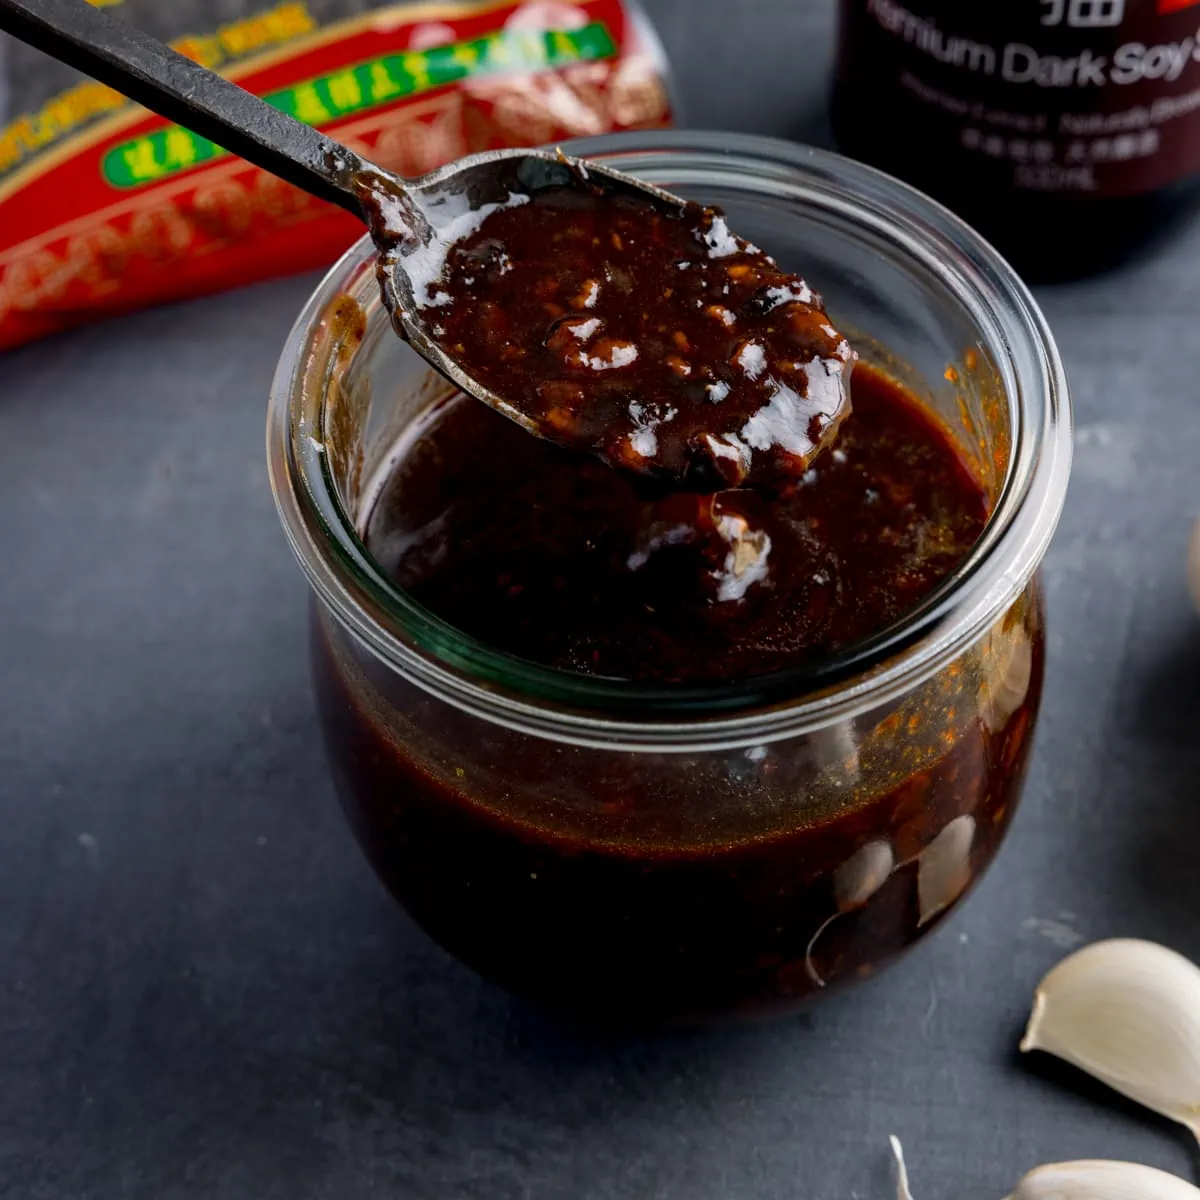 square image of a glass jar filled with homemade black bean sauce. There is a black spoon, taking a spoonful from the jar. The jar is on a dark surface and there are ingredients at the bottom.